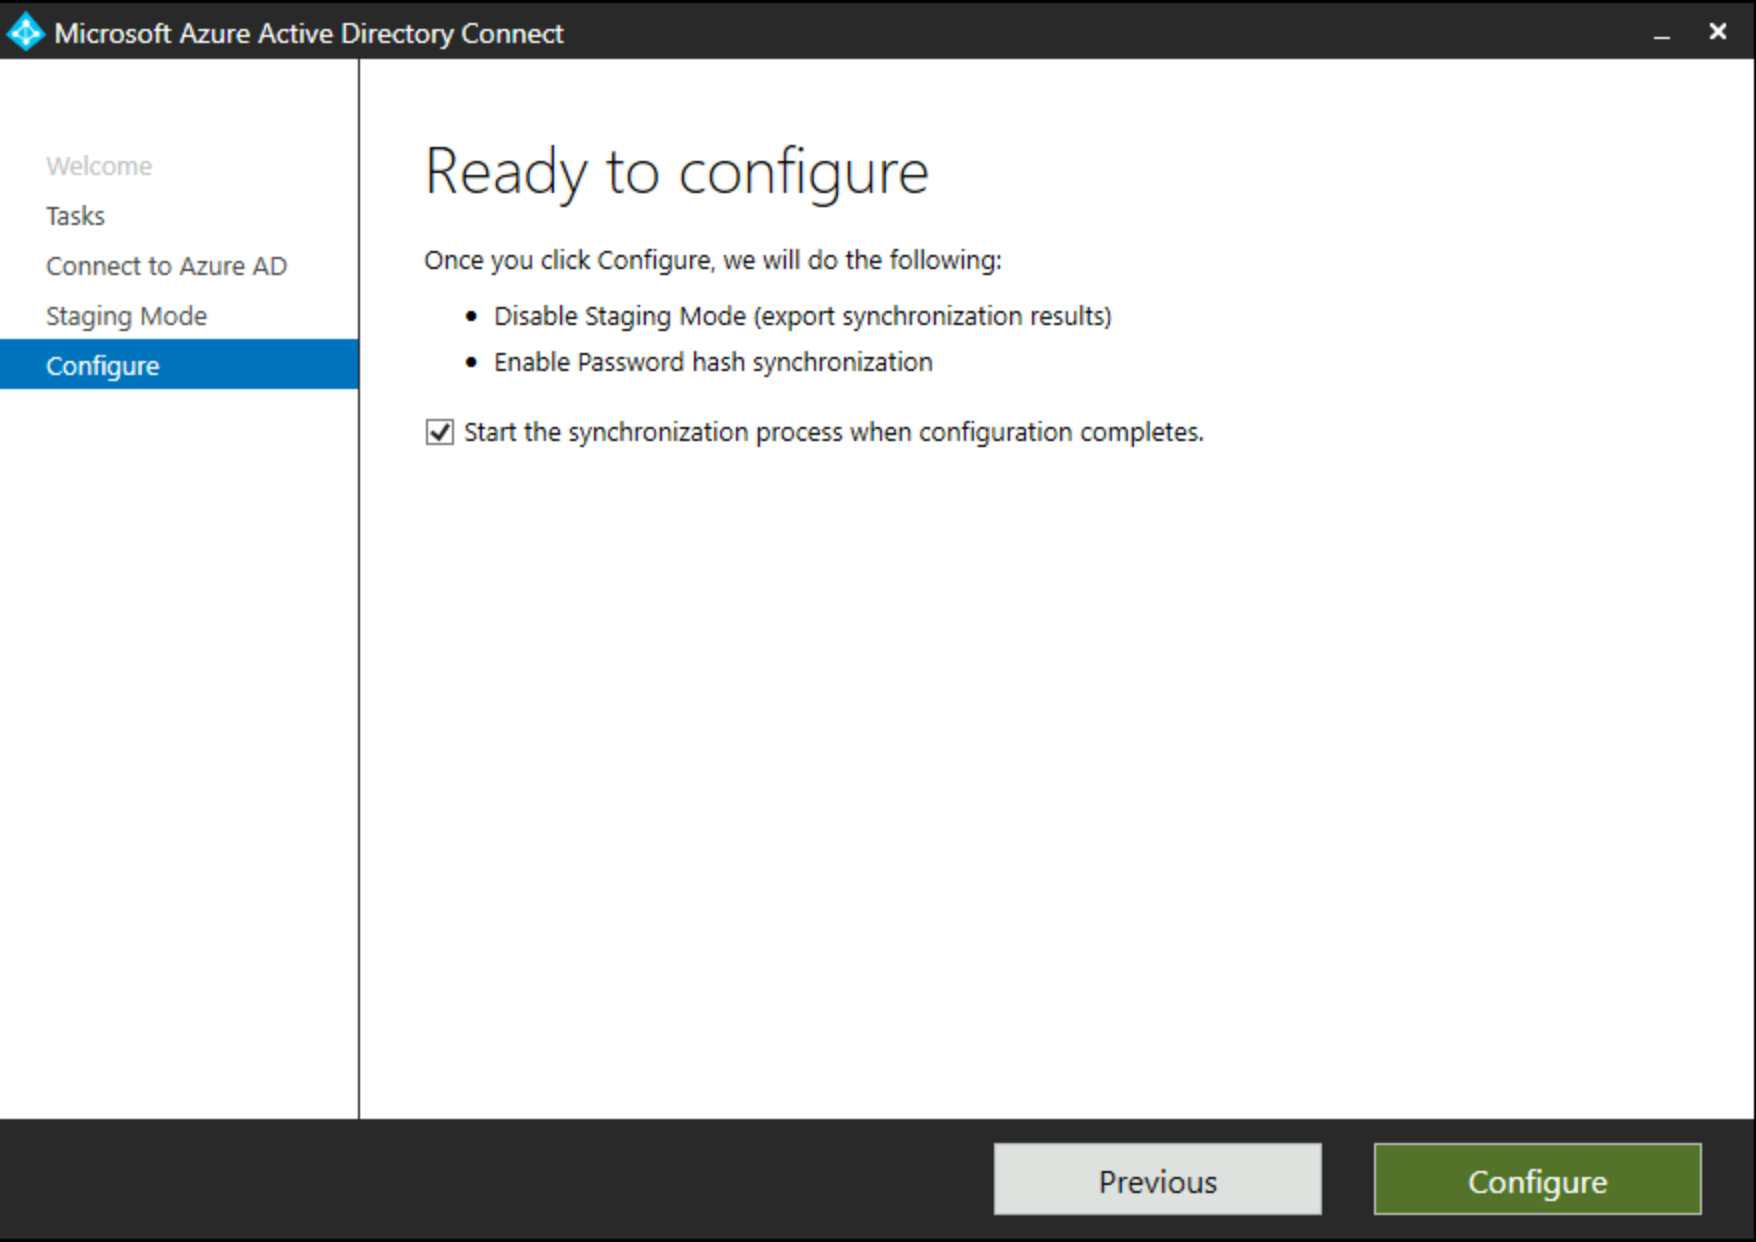 Screenshot shows Ready to Configure screen in the Staging Azure AD Connect dialog box.